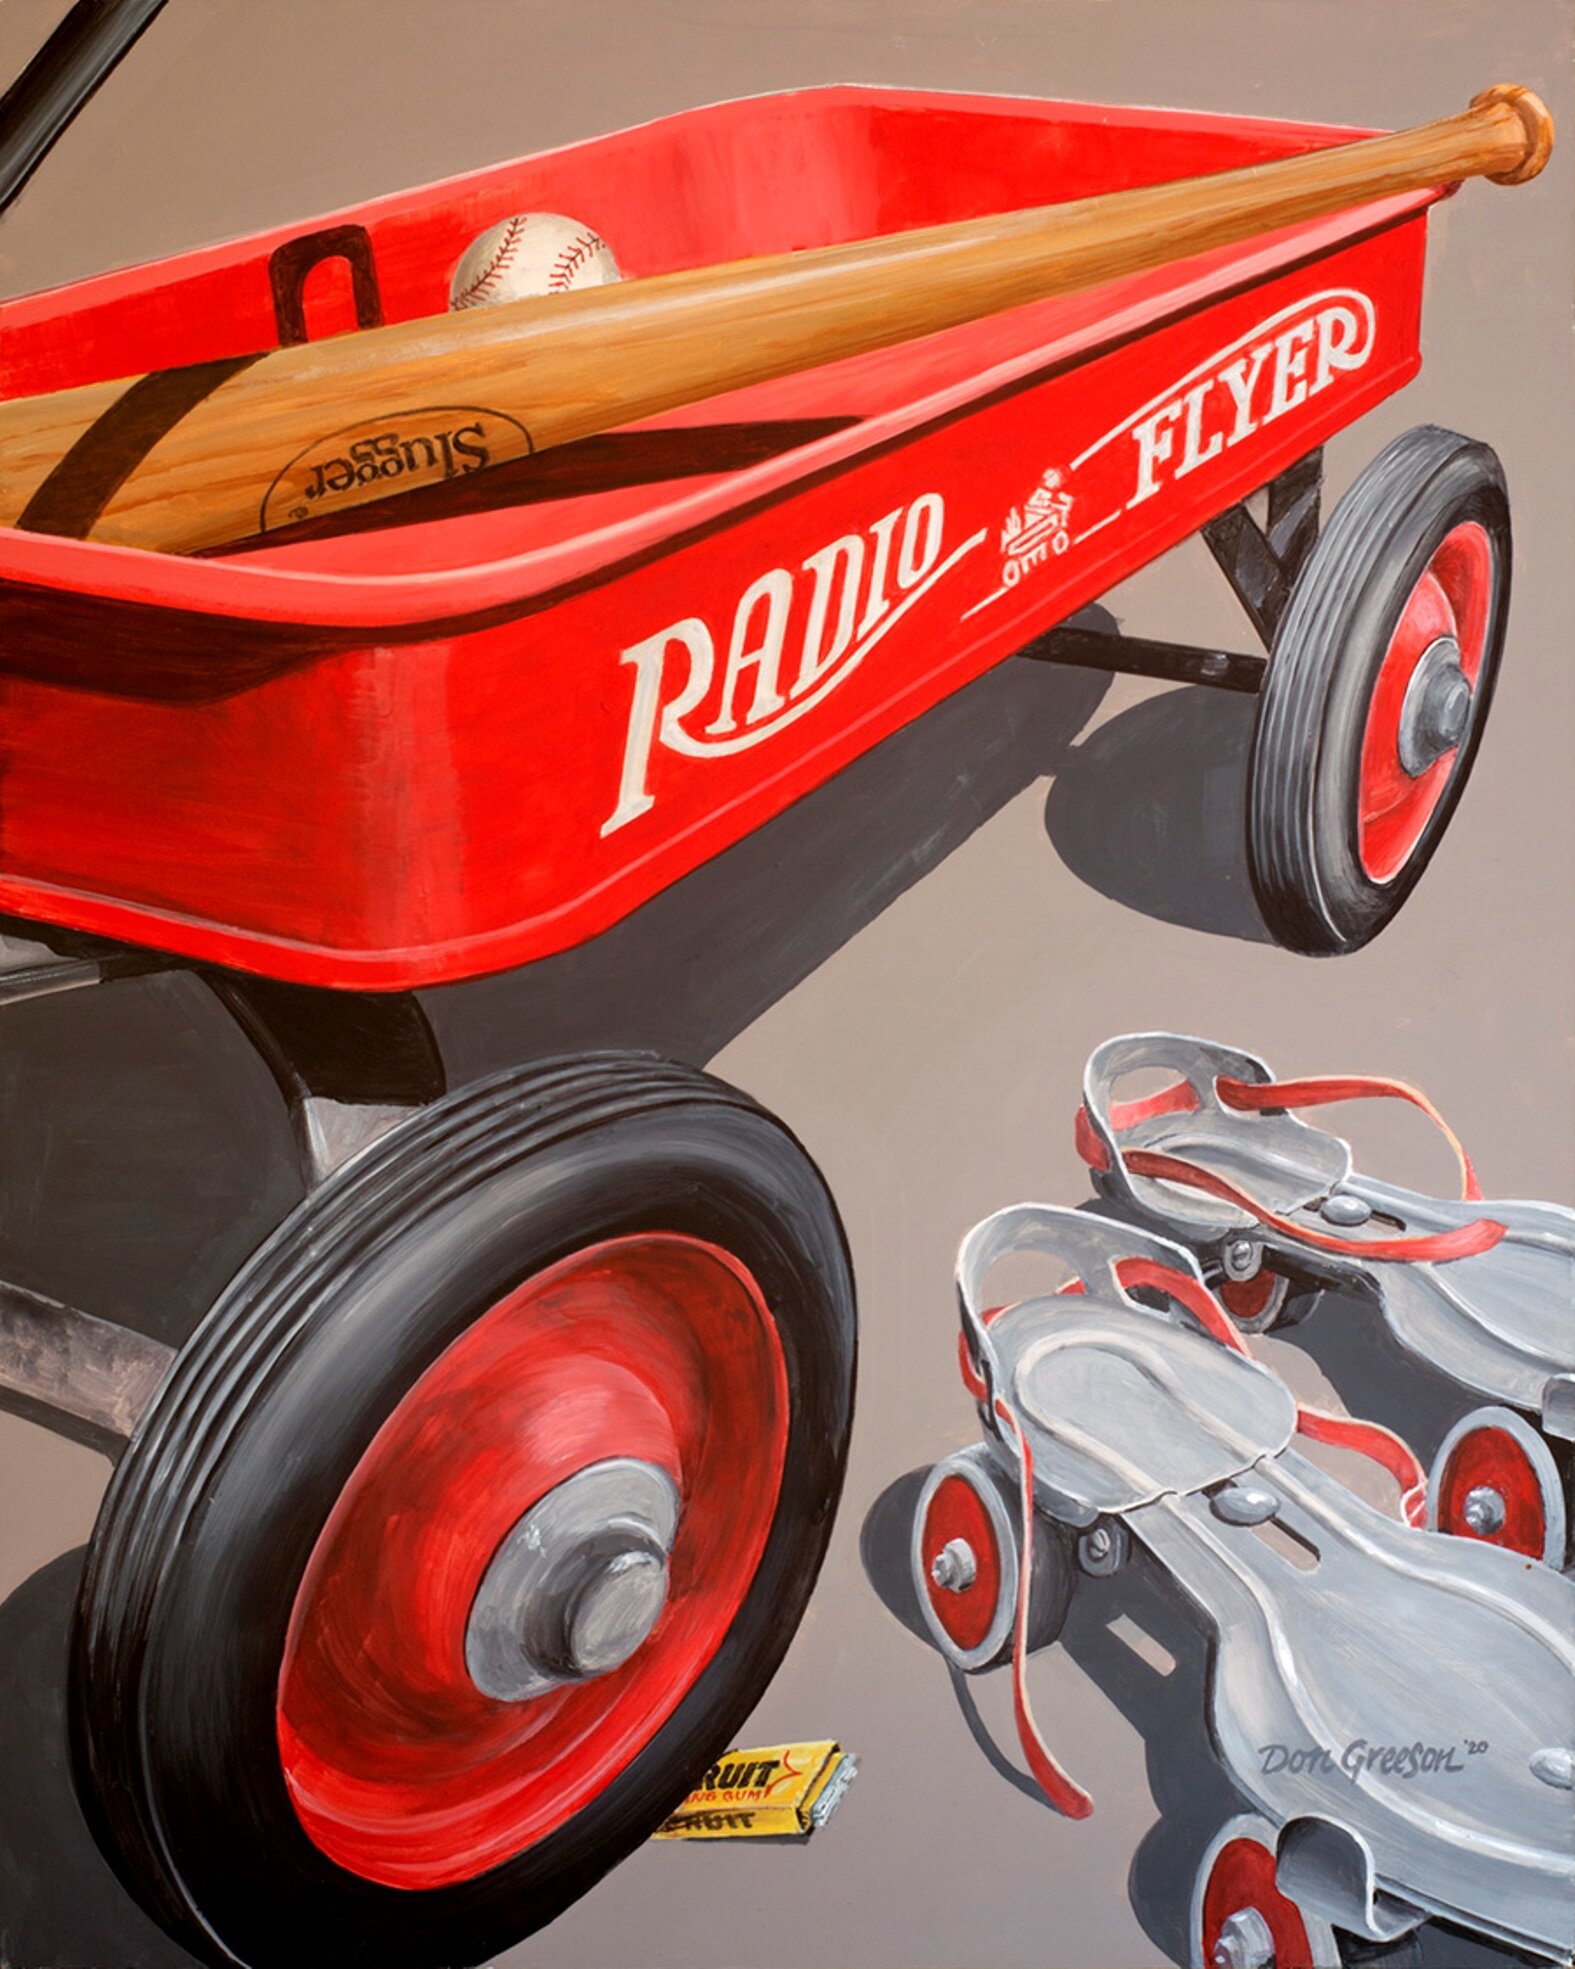 "Red Wagon" by Don Greeson